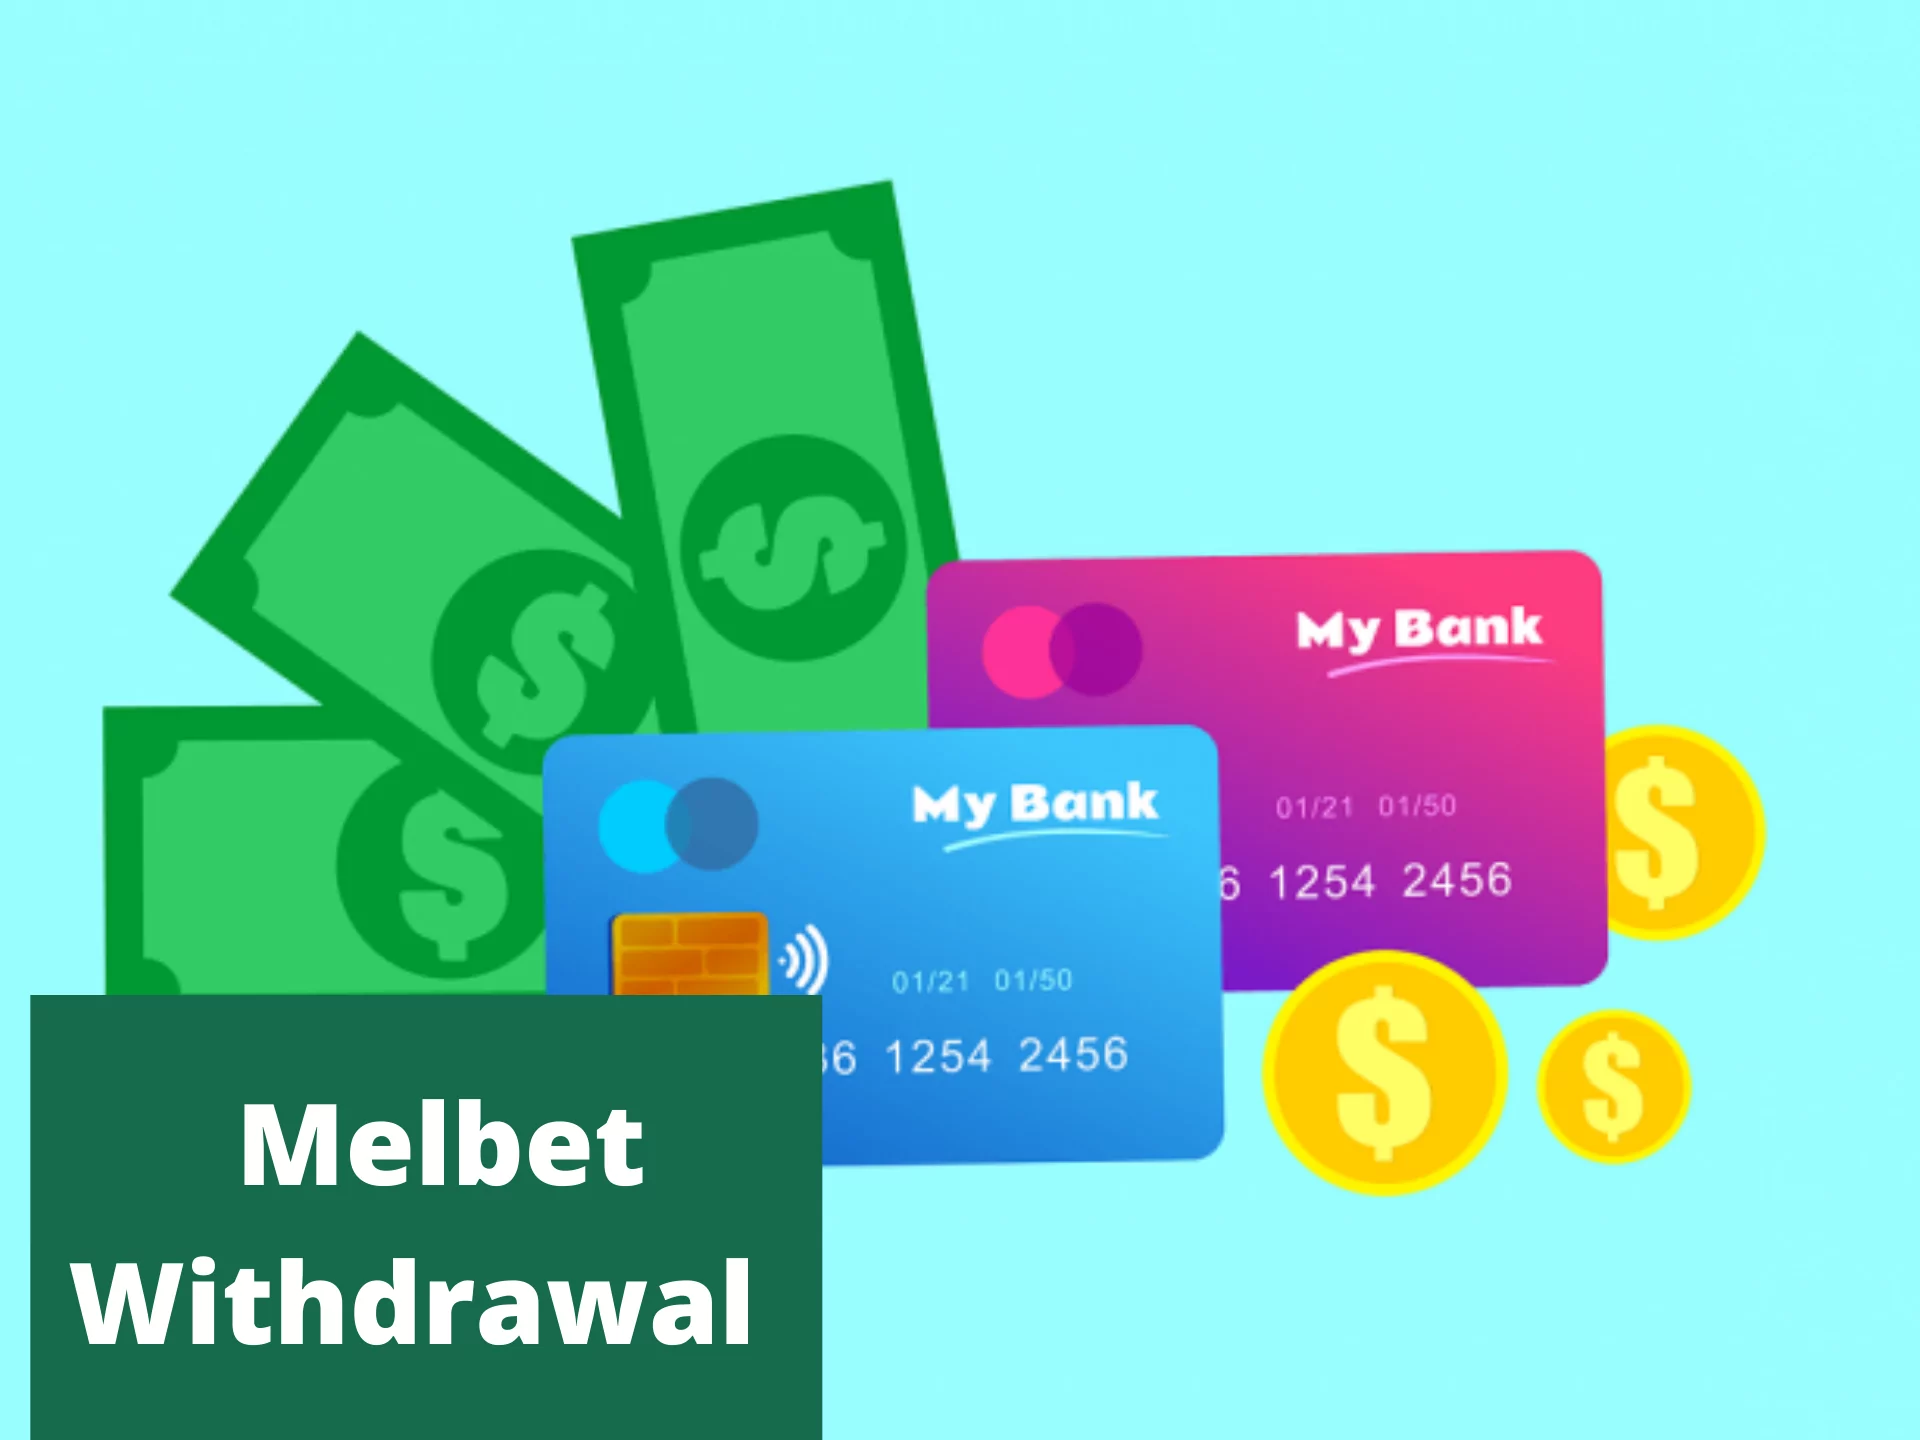 Melbet withdrawal step-by-step instruction.